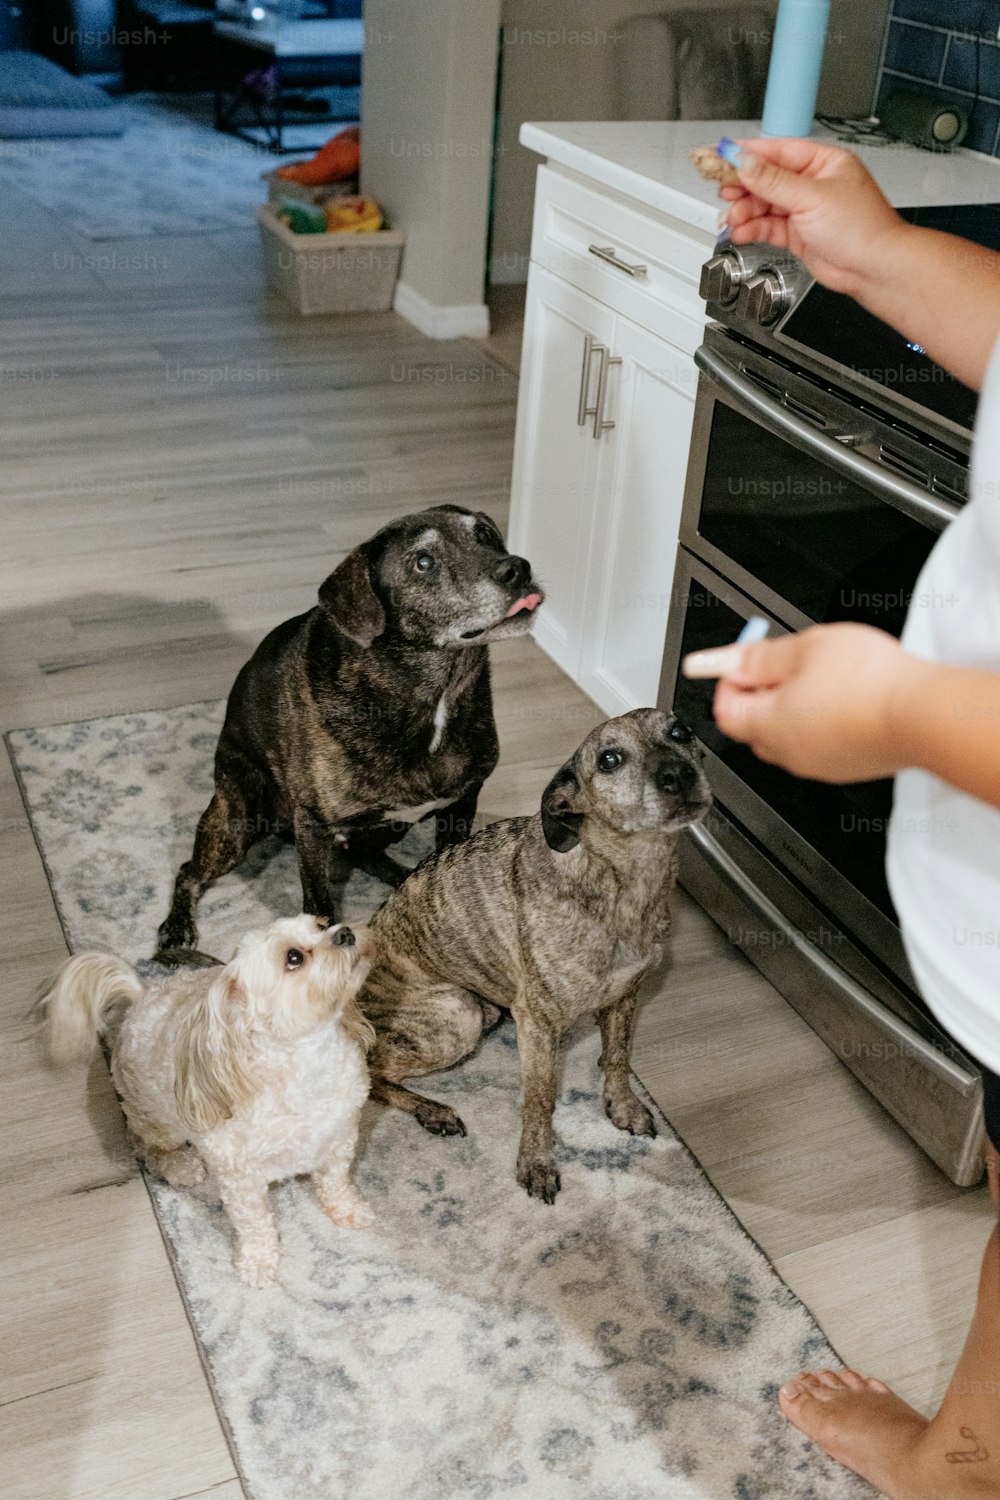 two dogs and a person in a kitchen